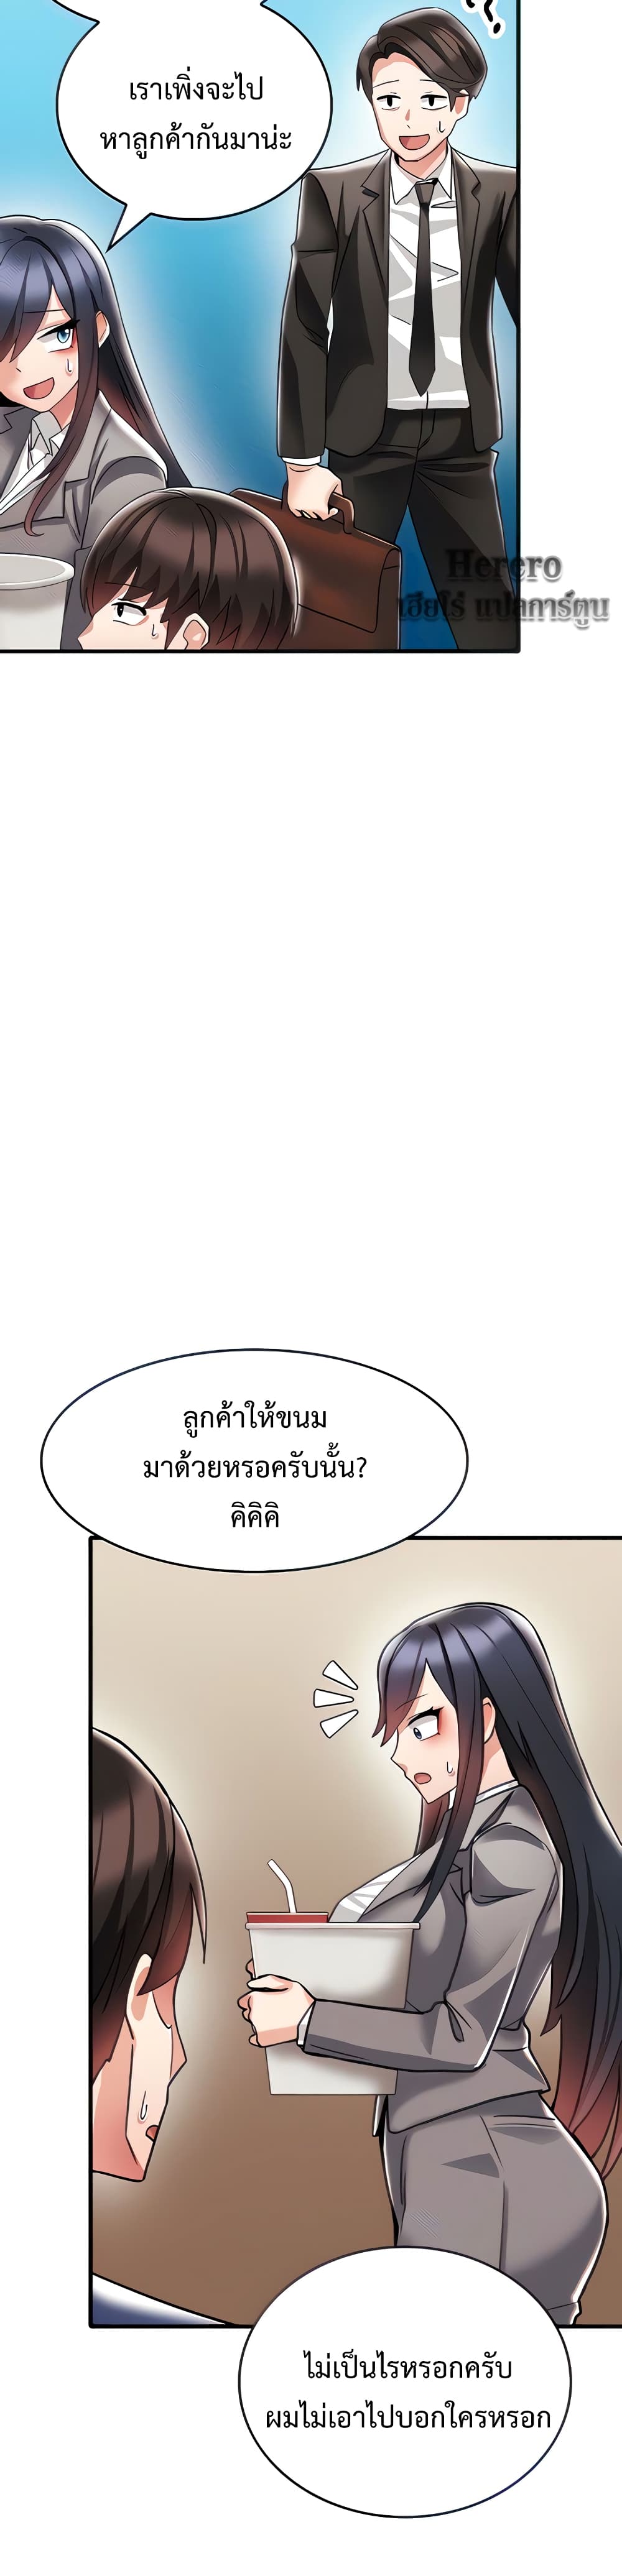 Relationship Reverse Button: Let’s Make Her Submissive 4 ภาพที่ 7